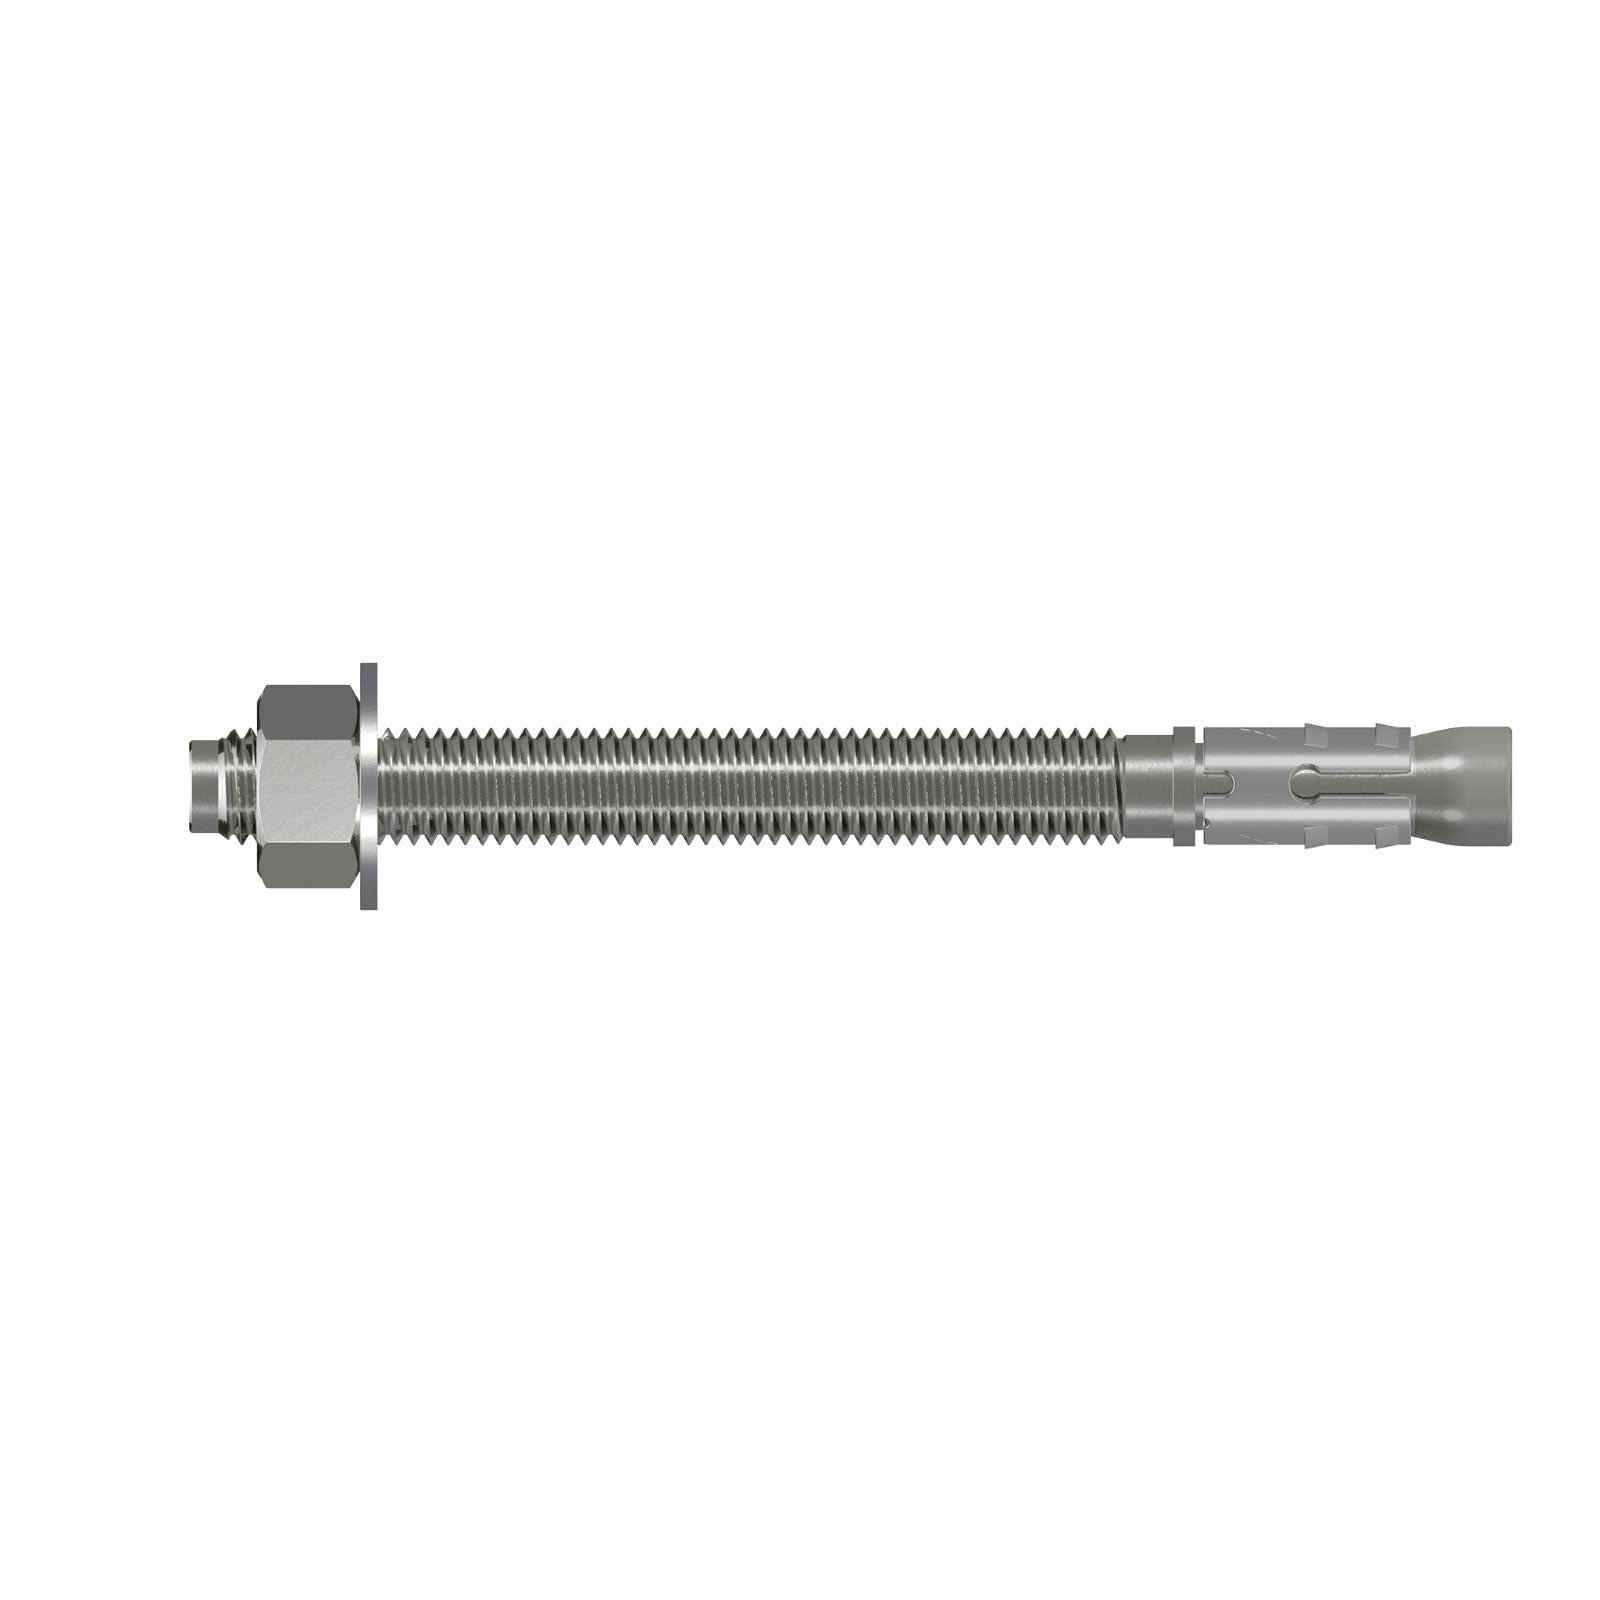 5/8" x 7" Simpson Strong Bolt 2 Wedge Anchor, Stainless Steel